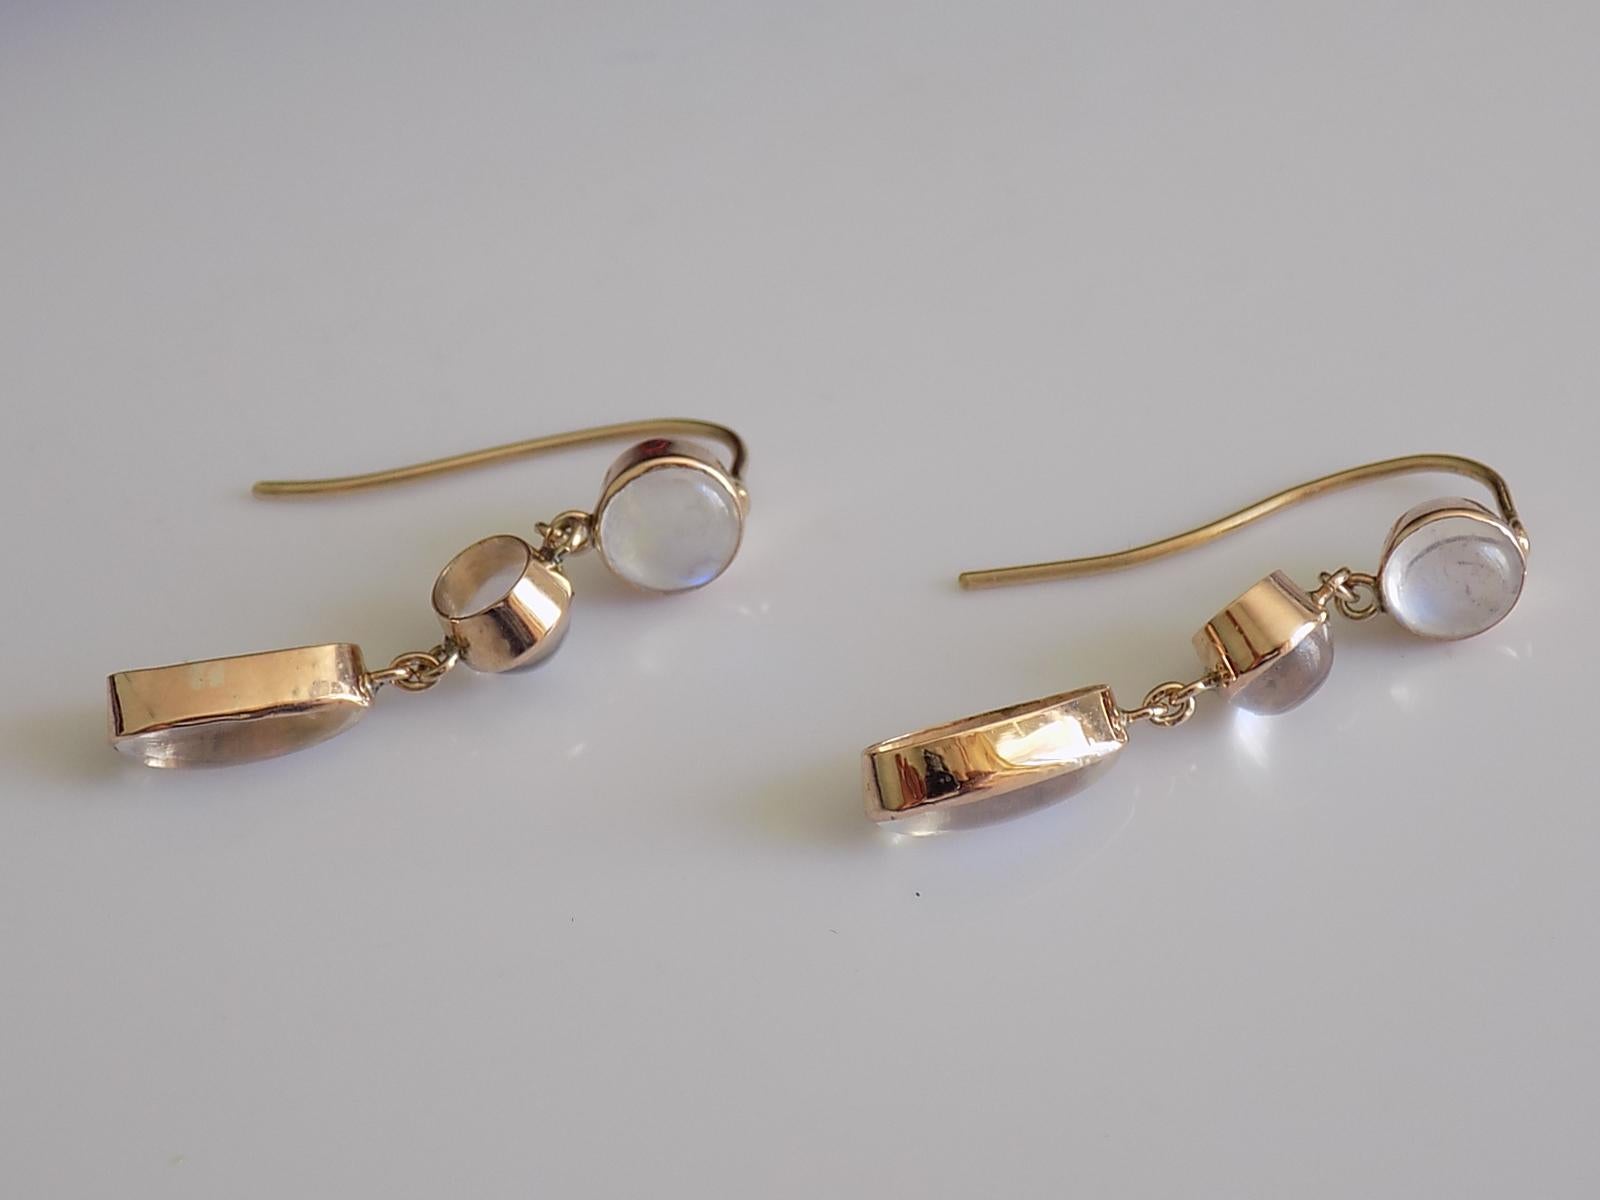 A Gorgeous Edwardian c.1900 9 Carat Gold and Moonstone drop earrings for pierced ears in antique box as found.

Drop 31mm.
Width of the top Moonstone 7mm.

The earrings in excellent condition for the age and ready to wear.